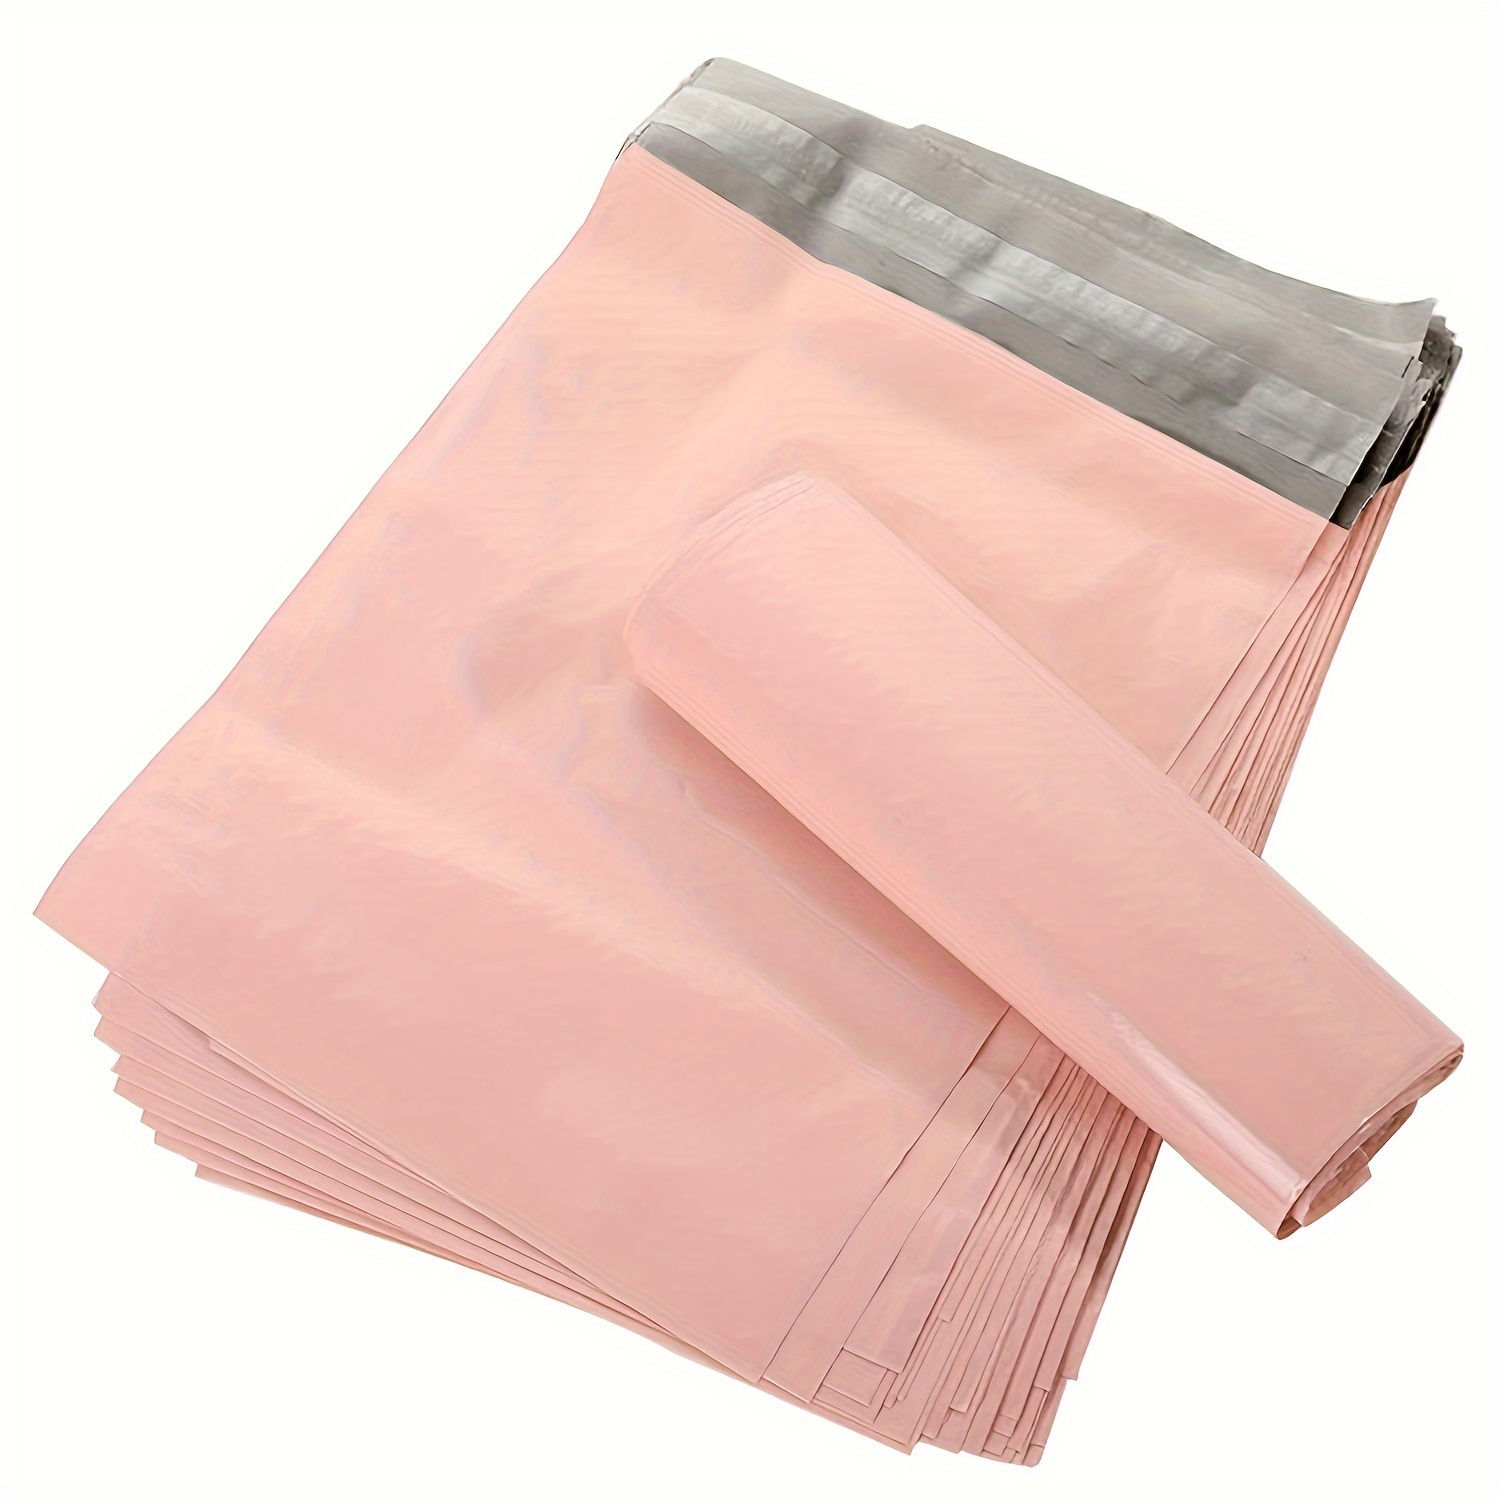 

100pcs, Women's Sanitary Napkin Disposal Bags, Self-sealing Seals Garbage Storage Bags, For Disposing Of Sanitary Napkins And Tampons, Cleaning Supplies, Household Gadgets, Back To School Supplies